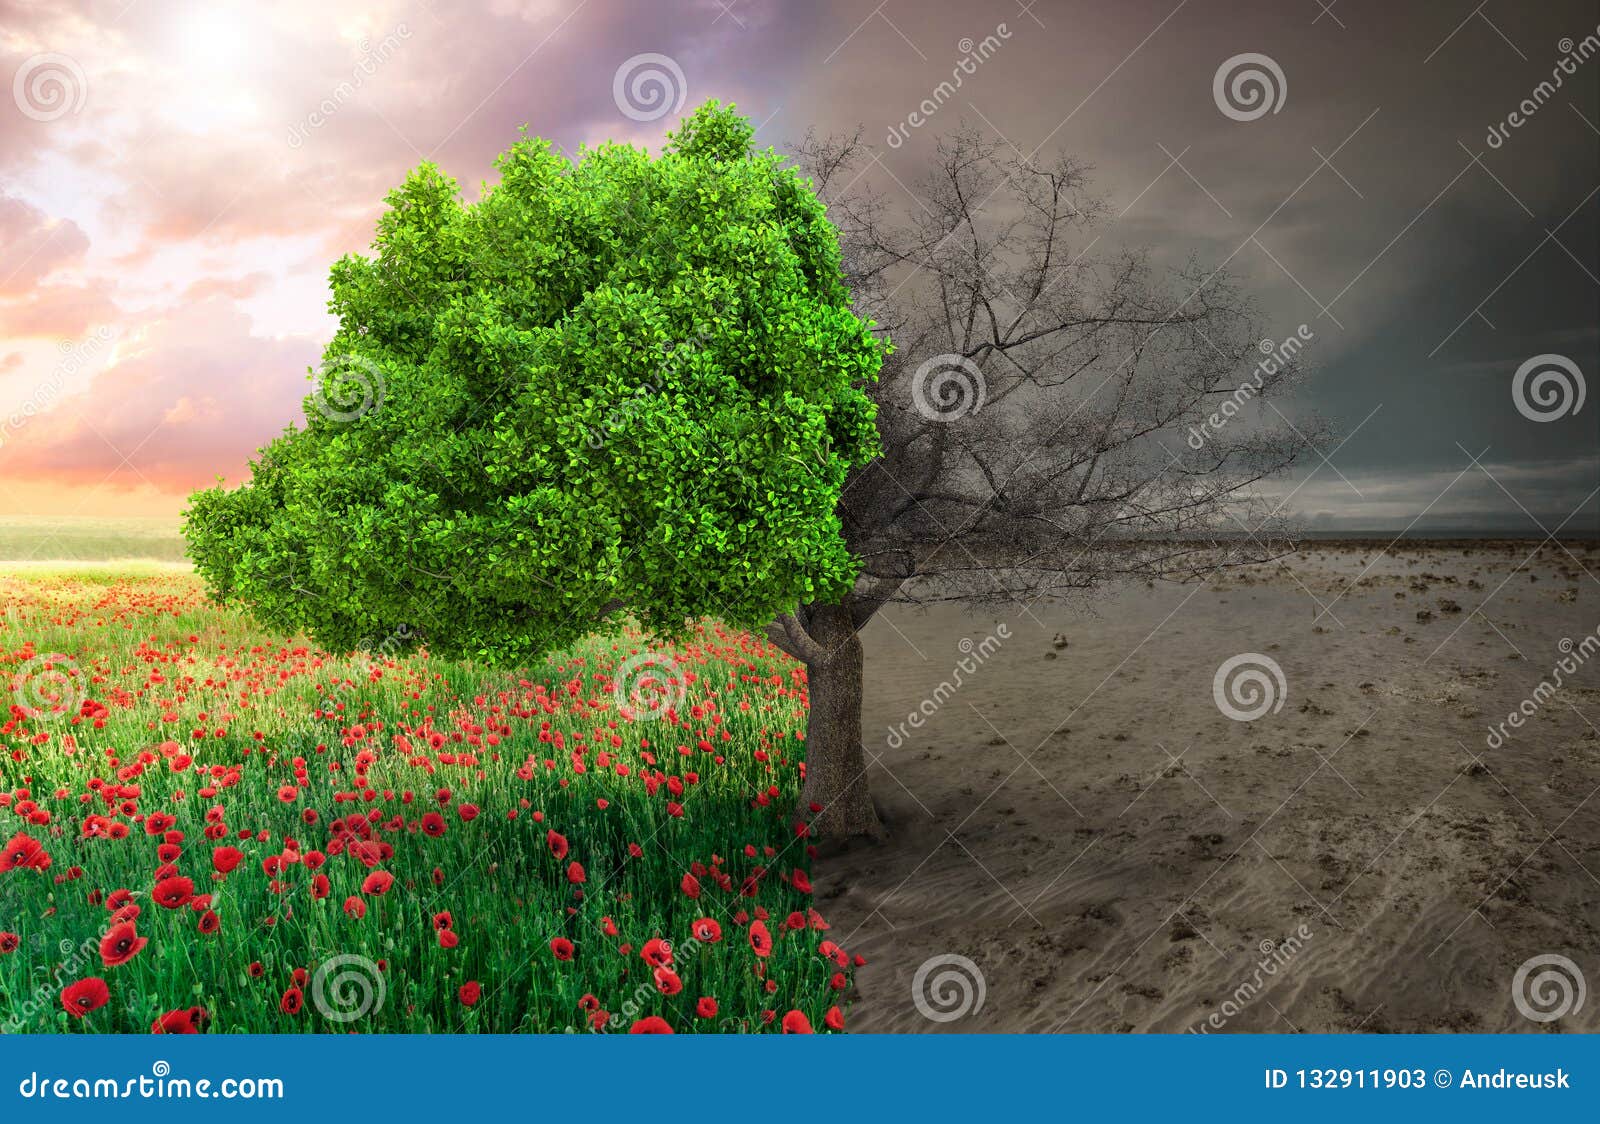 ecological concept with tree and climate changing landscape